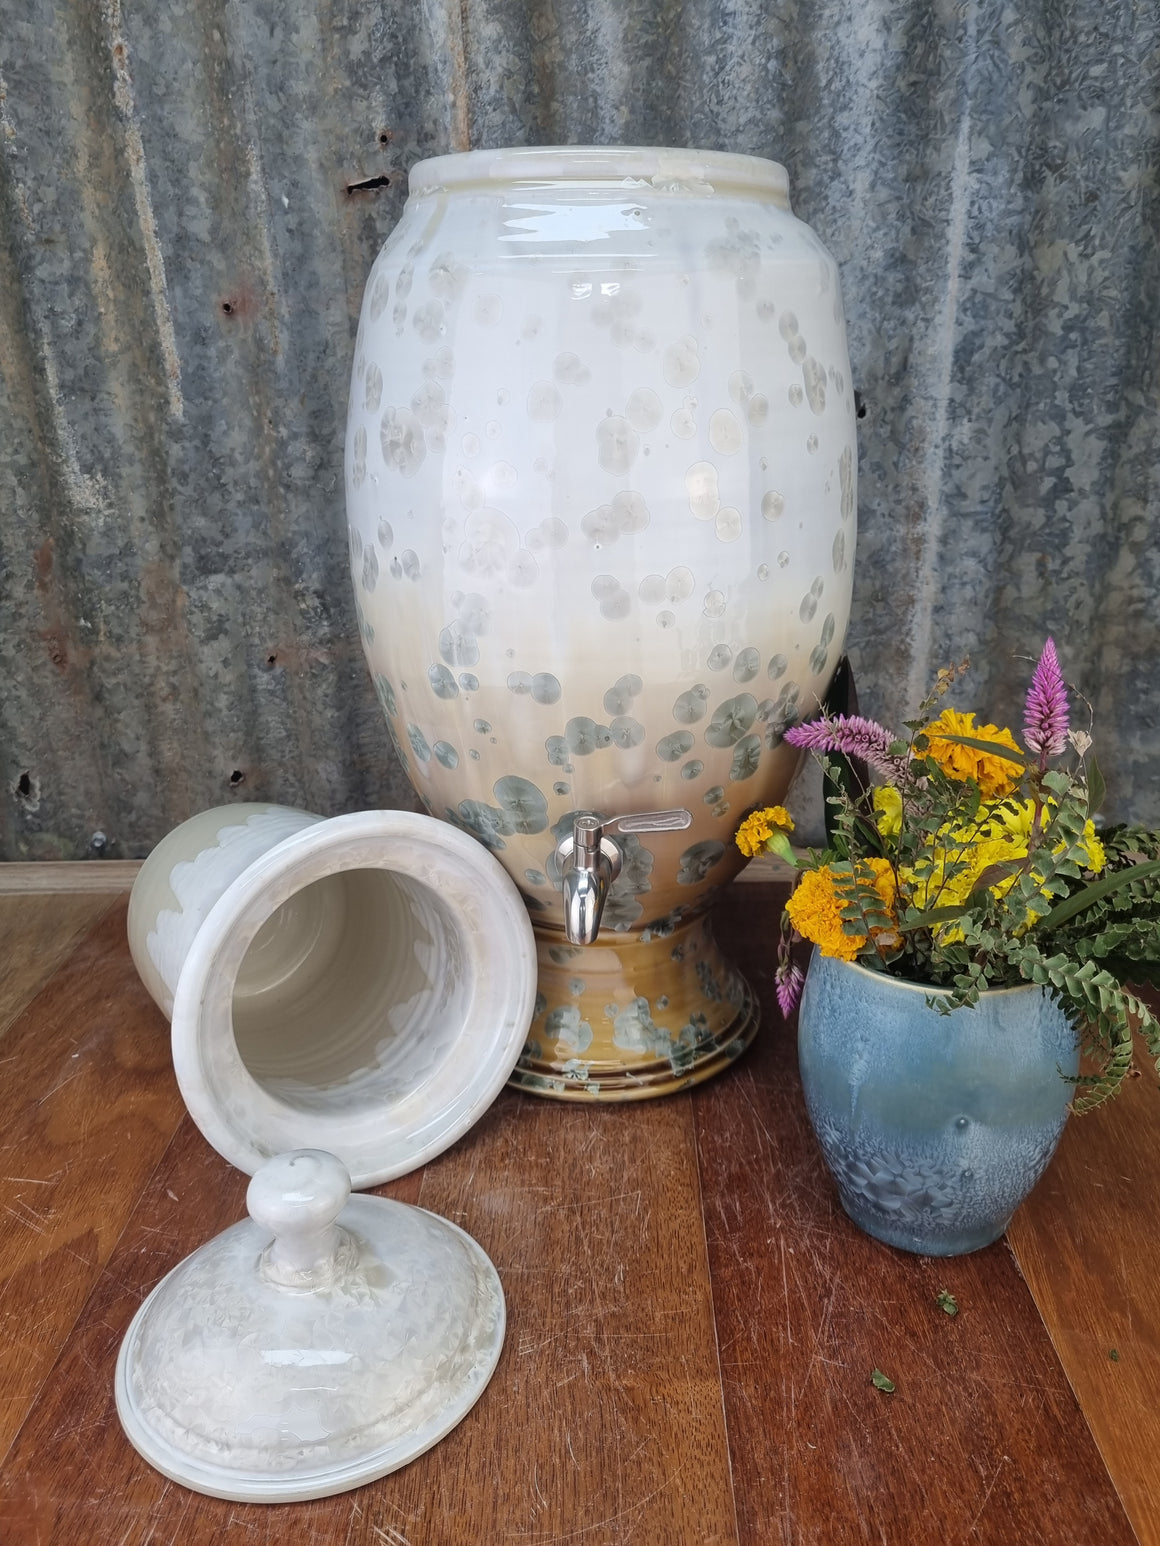 Crystalline Nickle & White Ceramic Water Filter - Peter Wallace Pottery